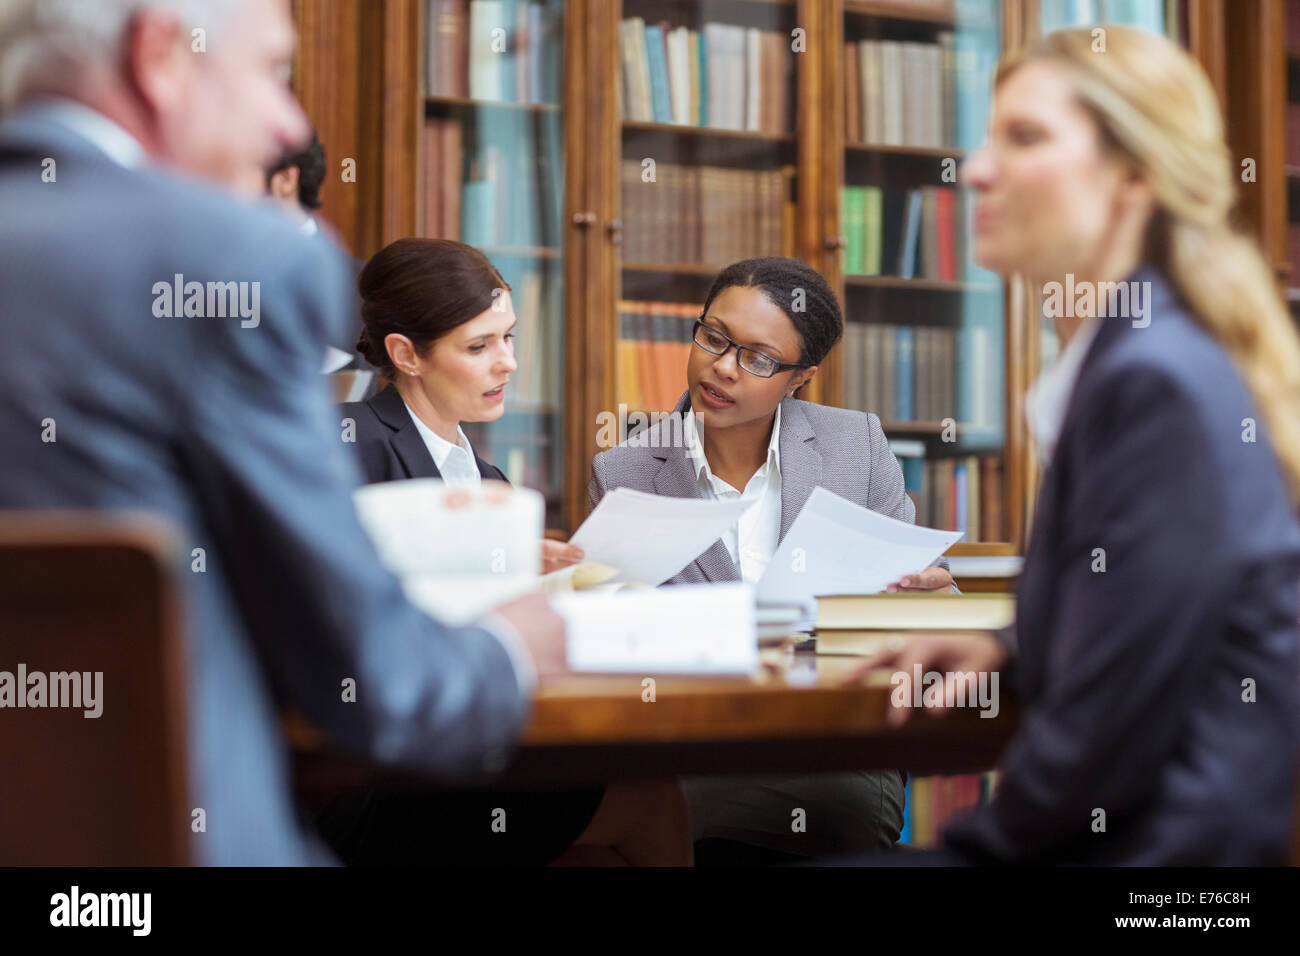 Lawyers examining documents in chambers Stock Photo